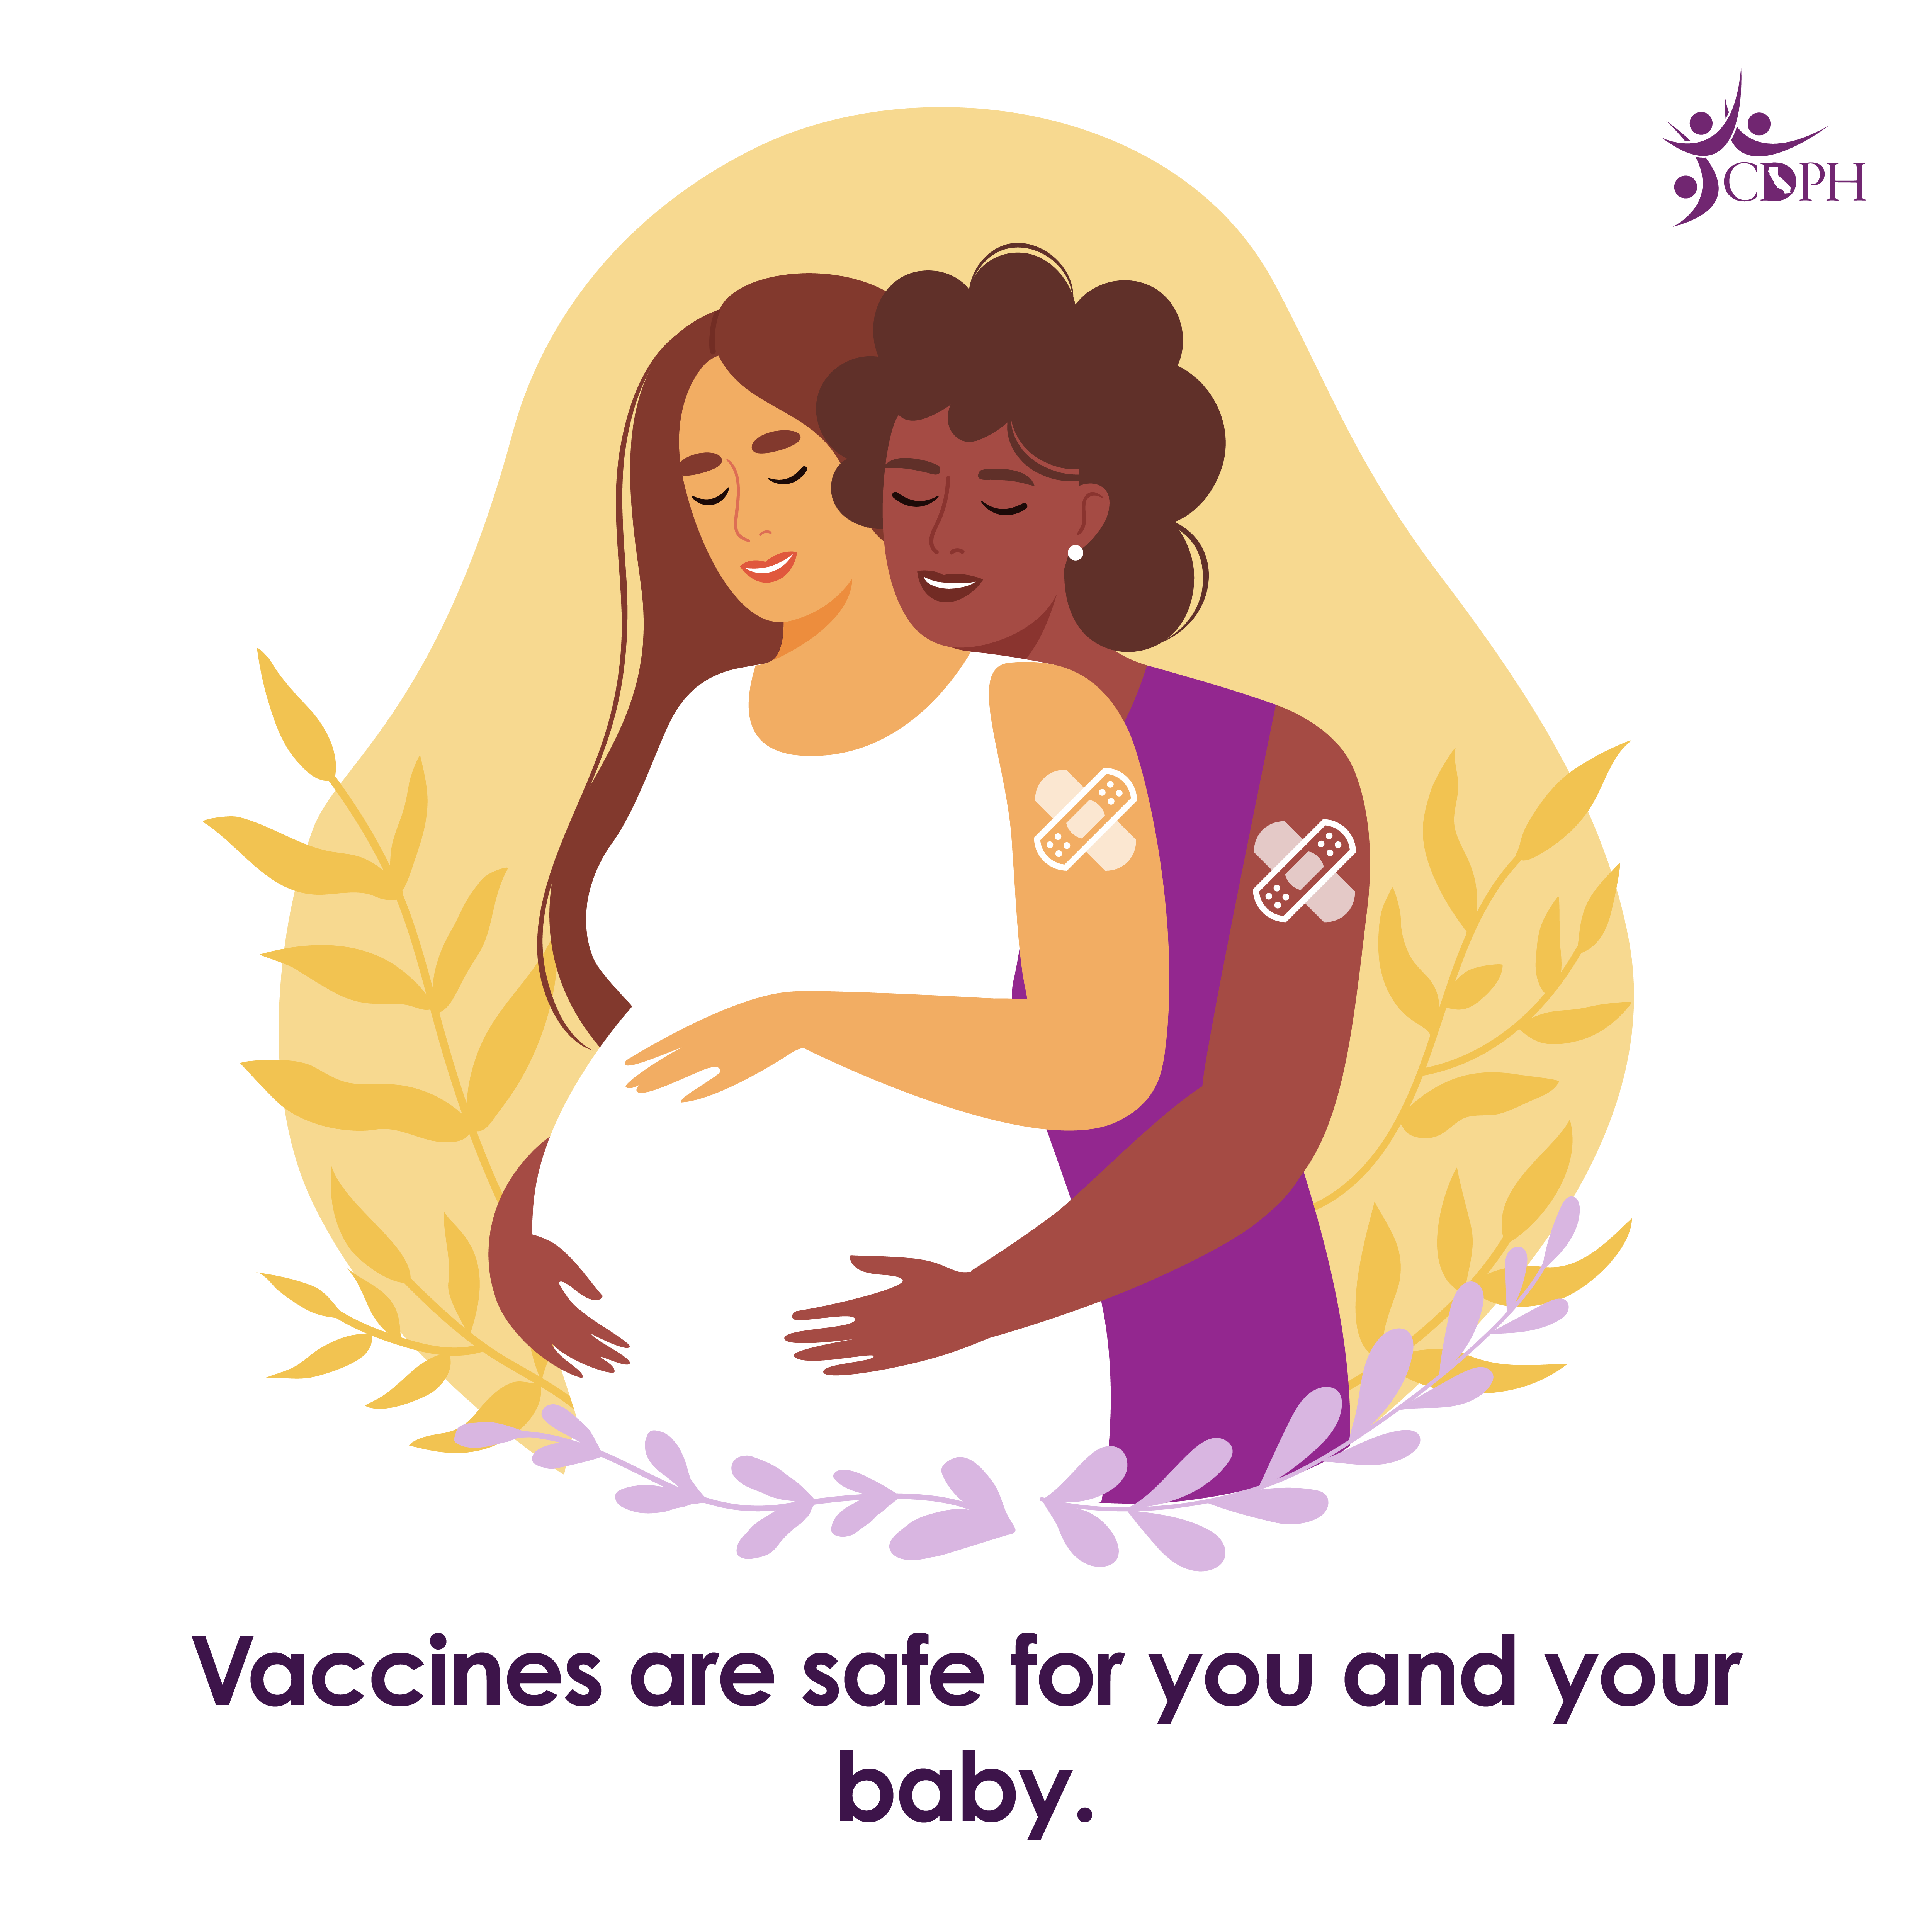 Vaccines are safe for you and your baby